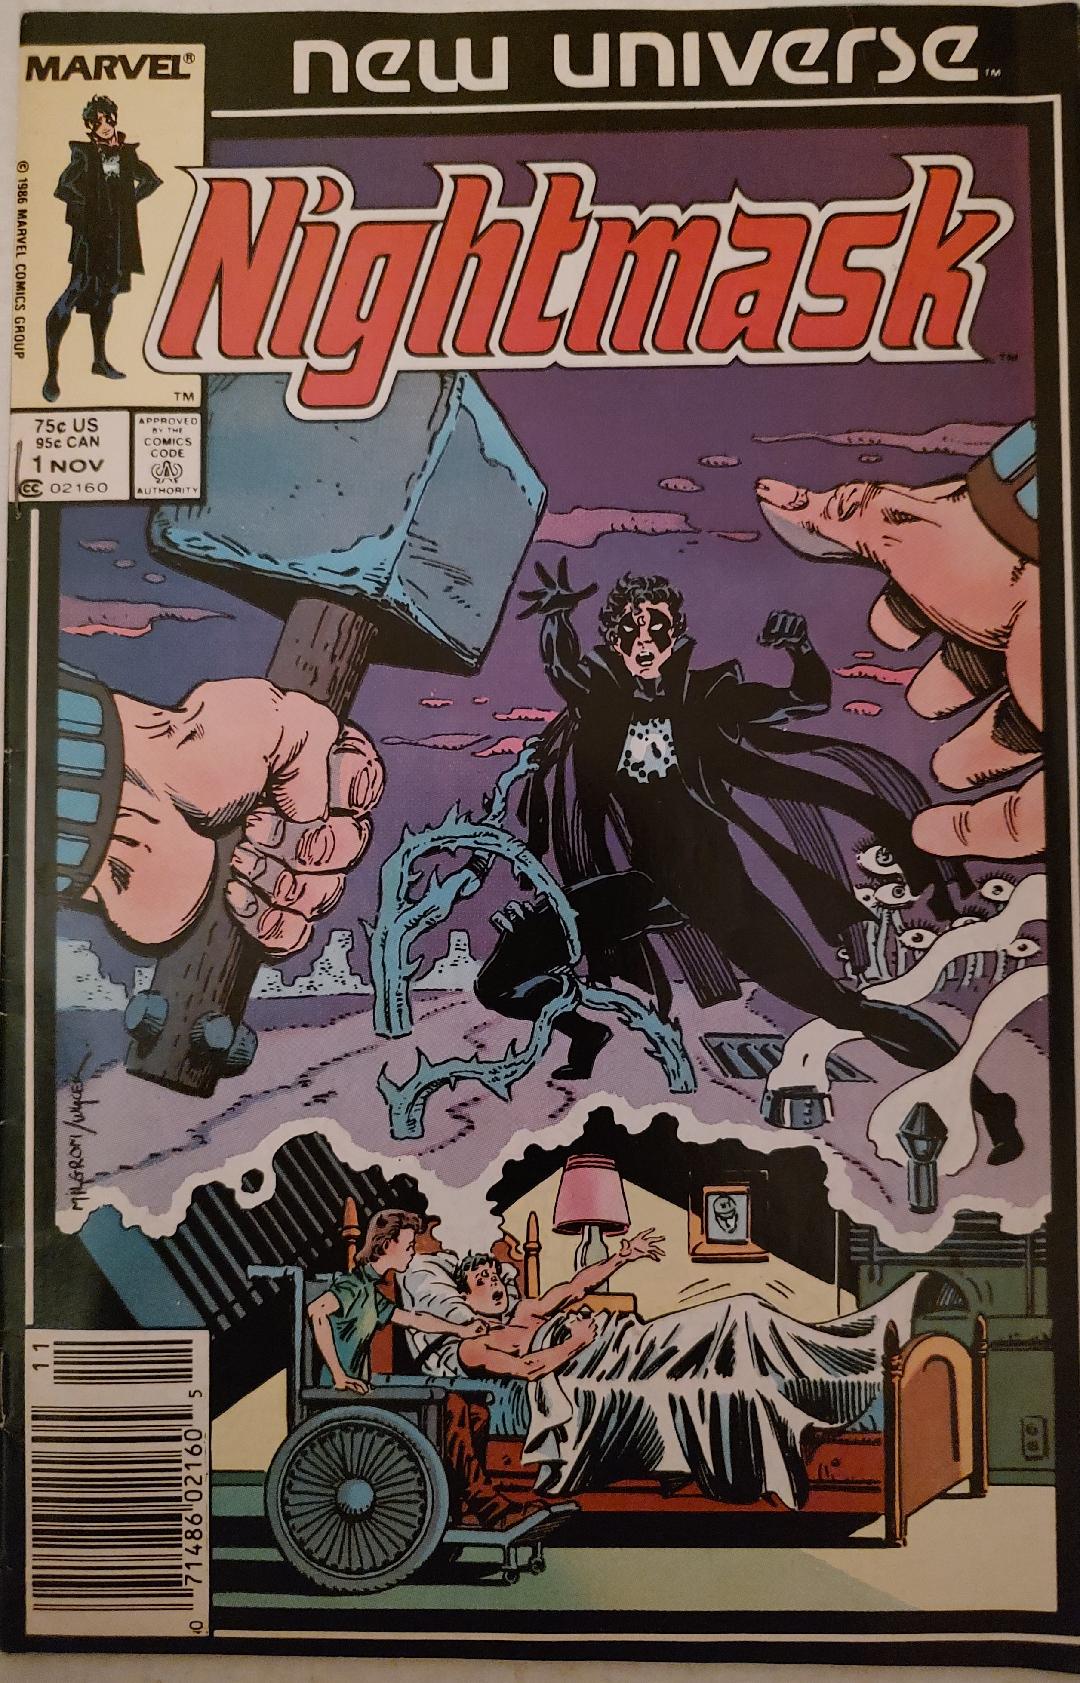 NightMask #1 Comic Book Cover